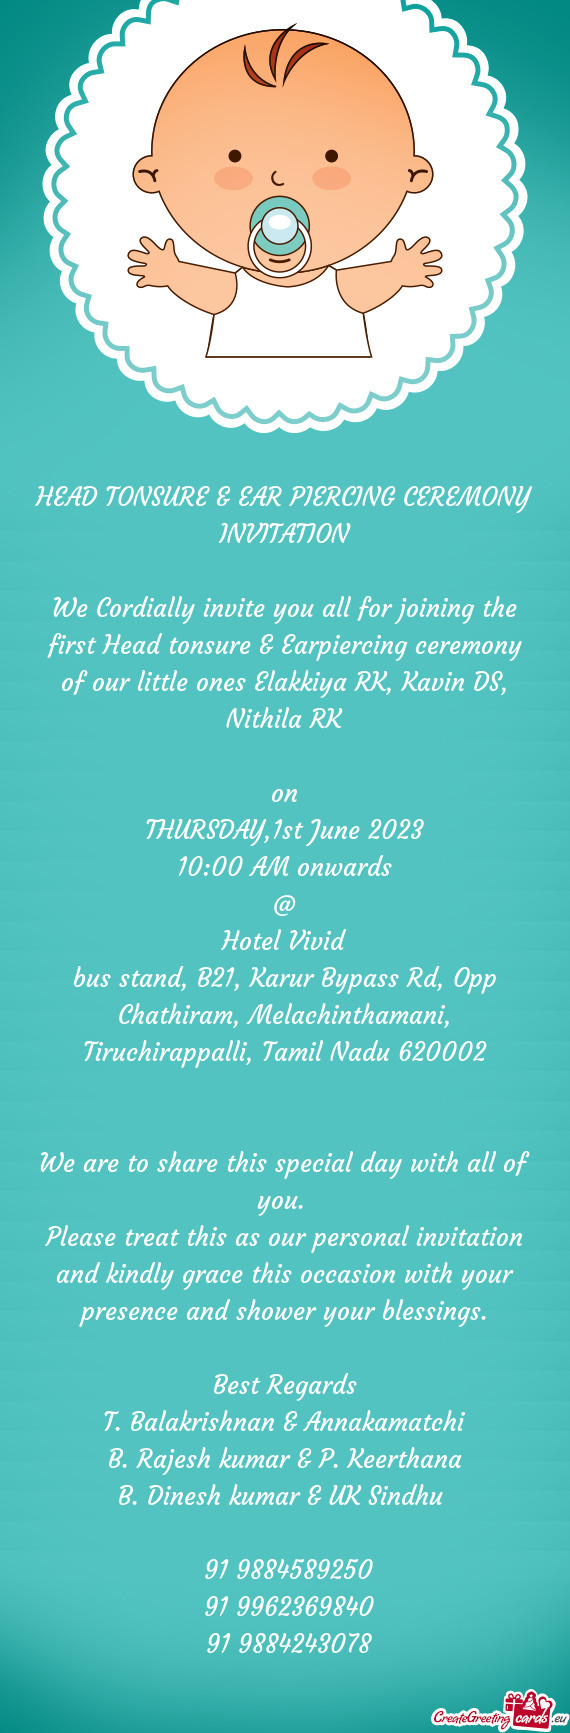 We Cordially invite you all for joining the first Head tonsure & Earpiercing ceremony of our little